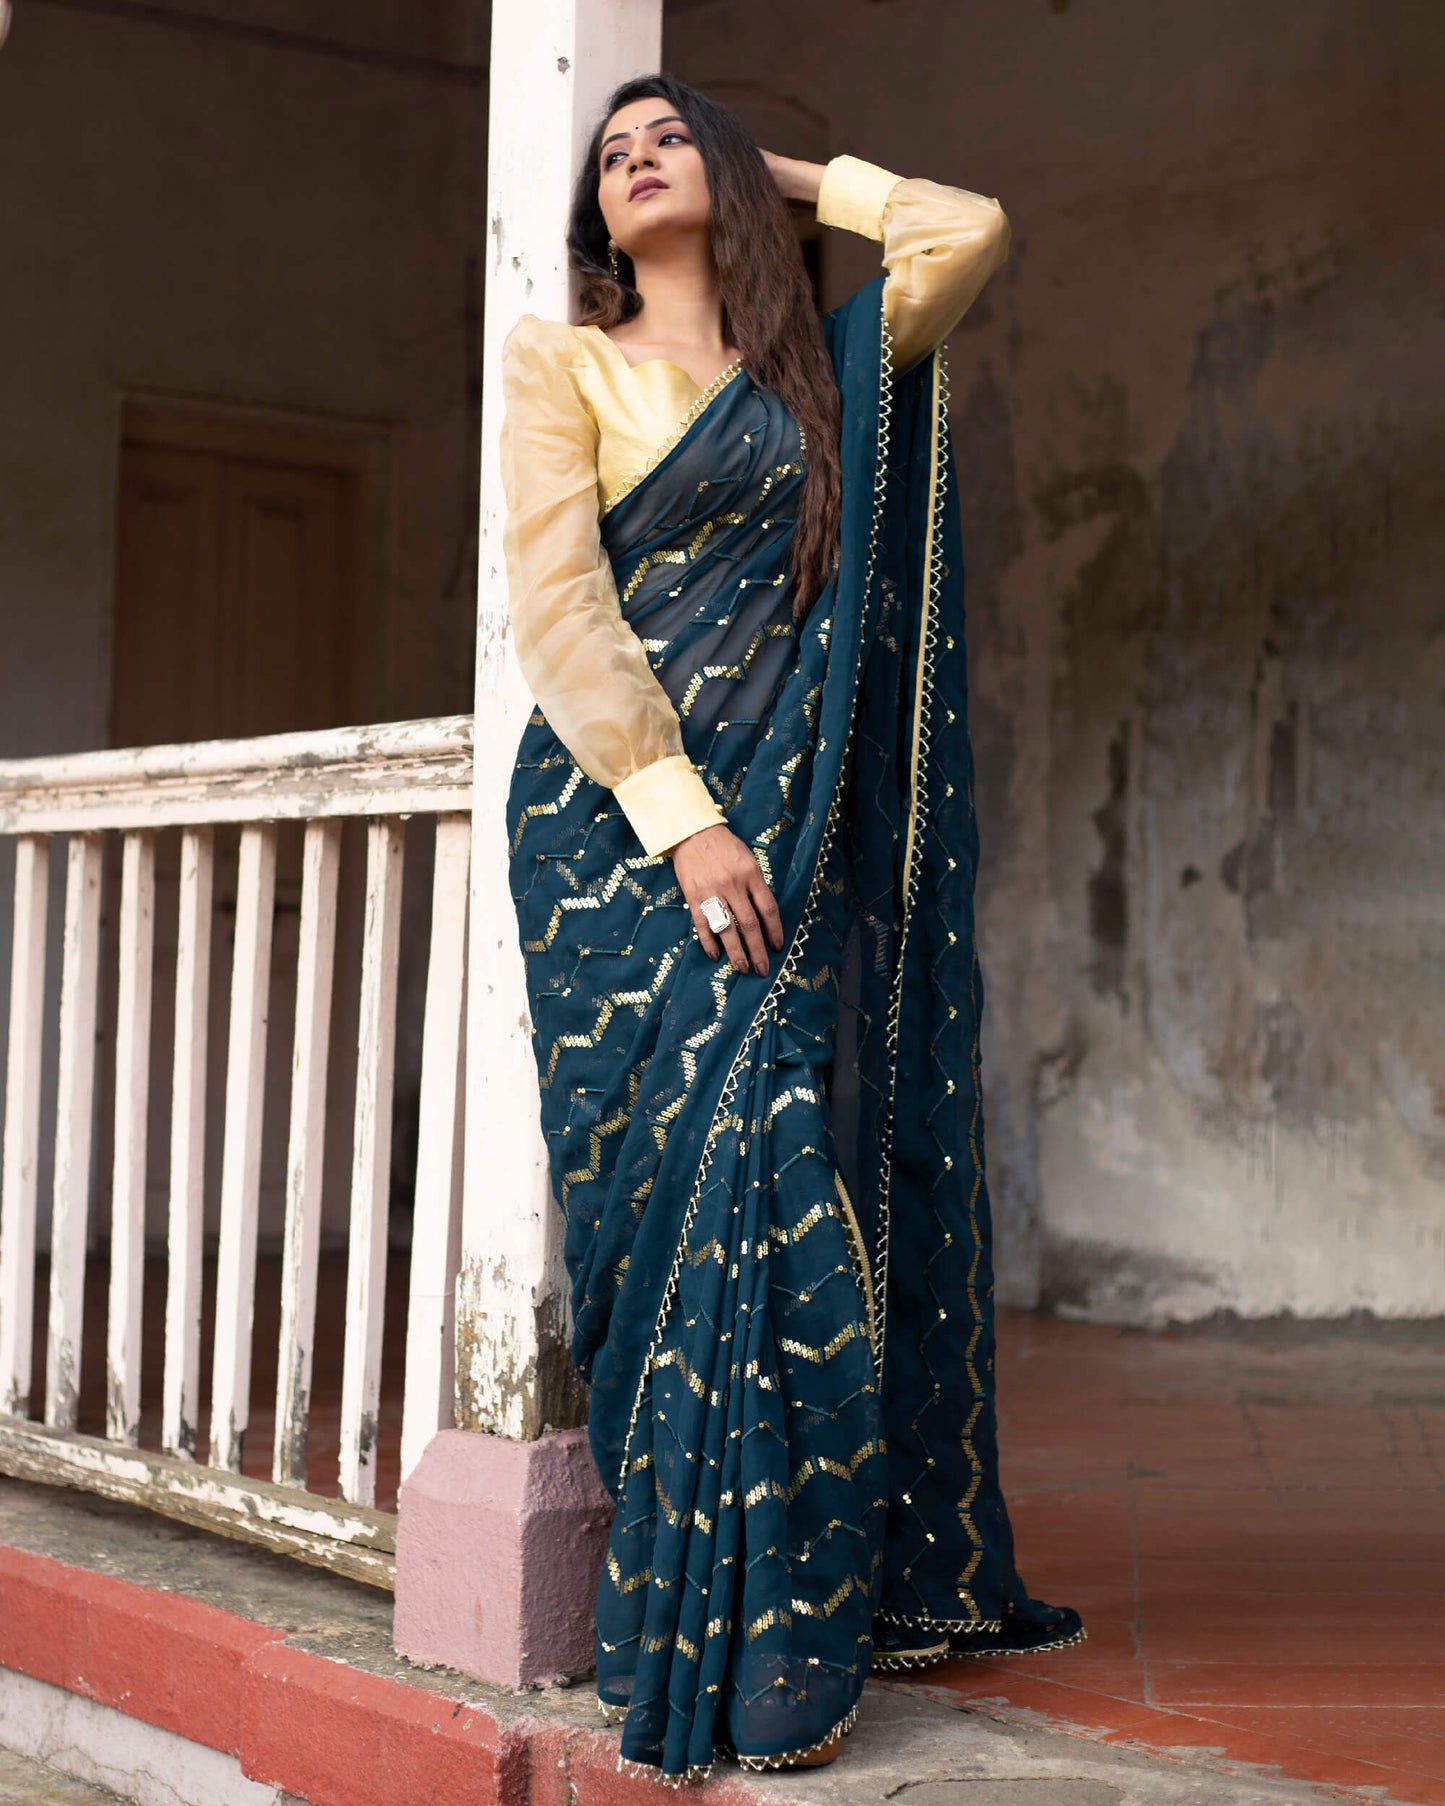 Peacock Blue Chevron Premium Sequins Georgette Saree with Pearl Work Lace Border